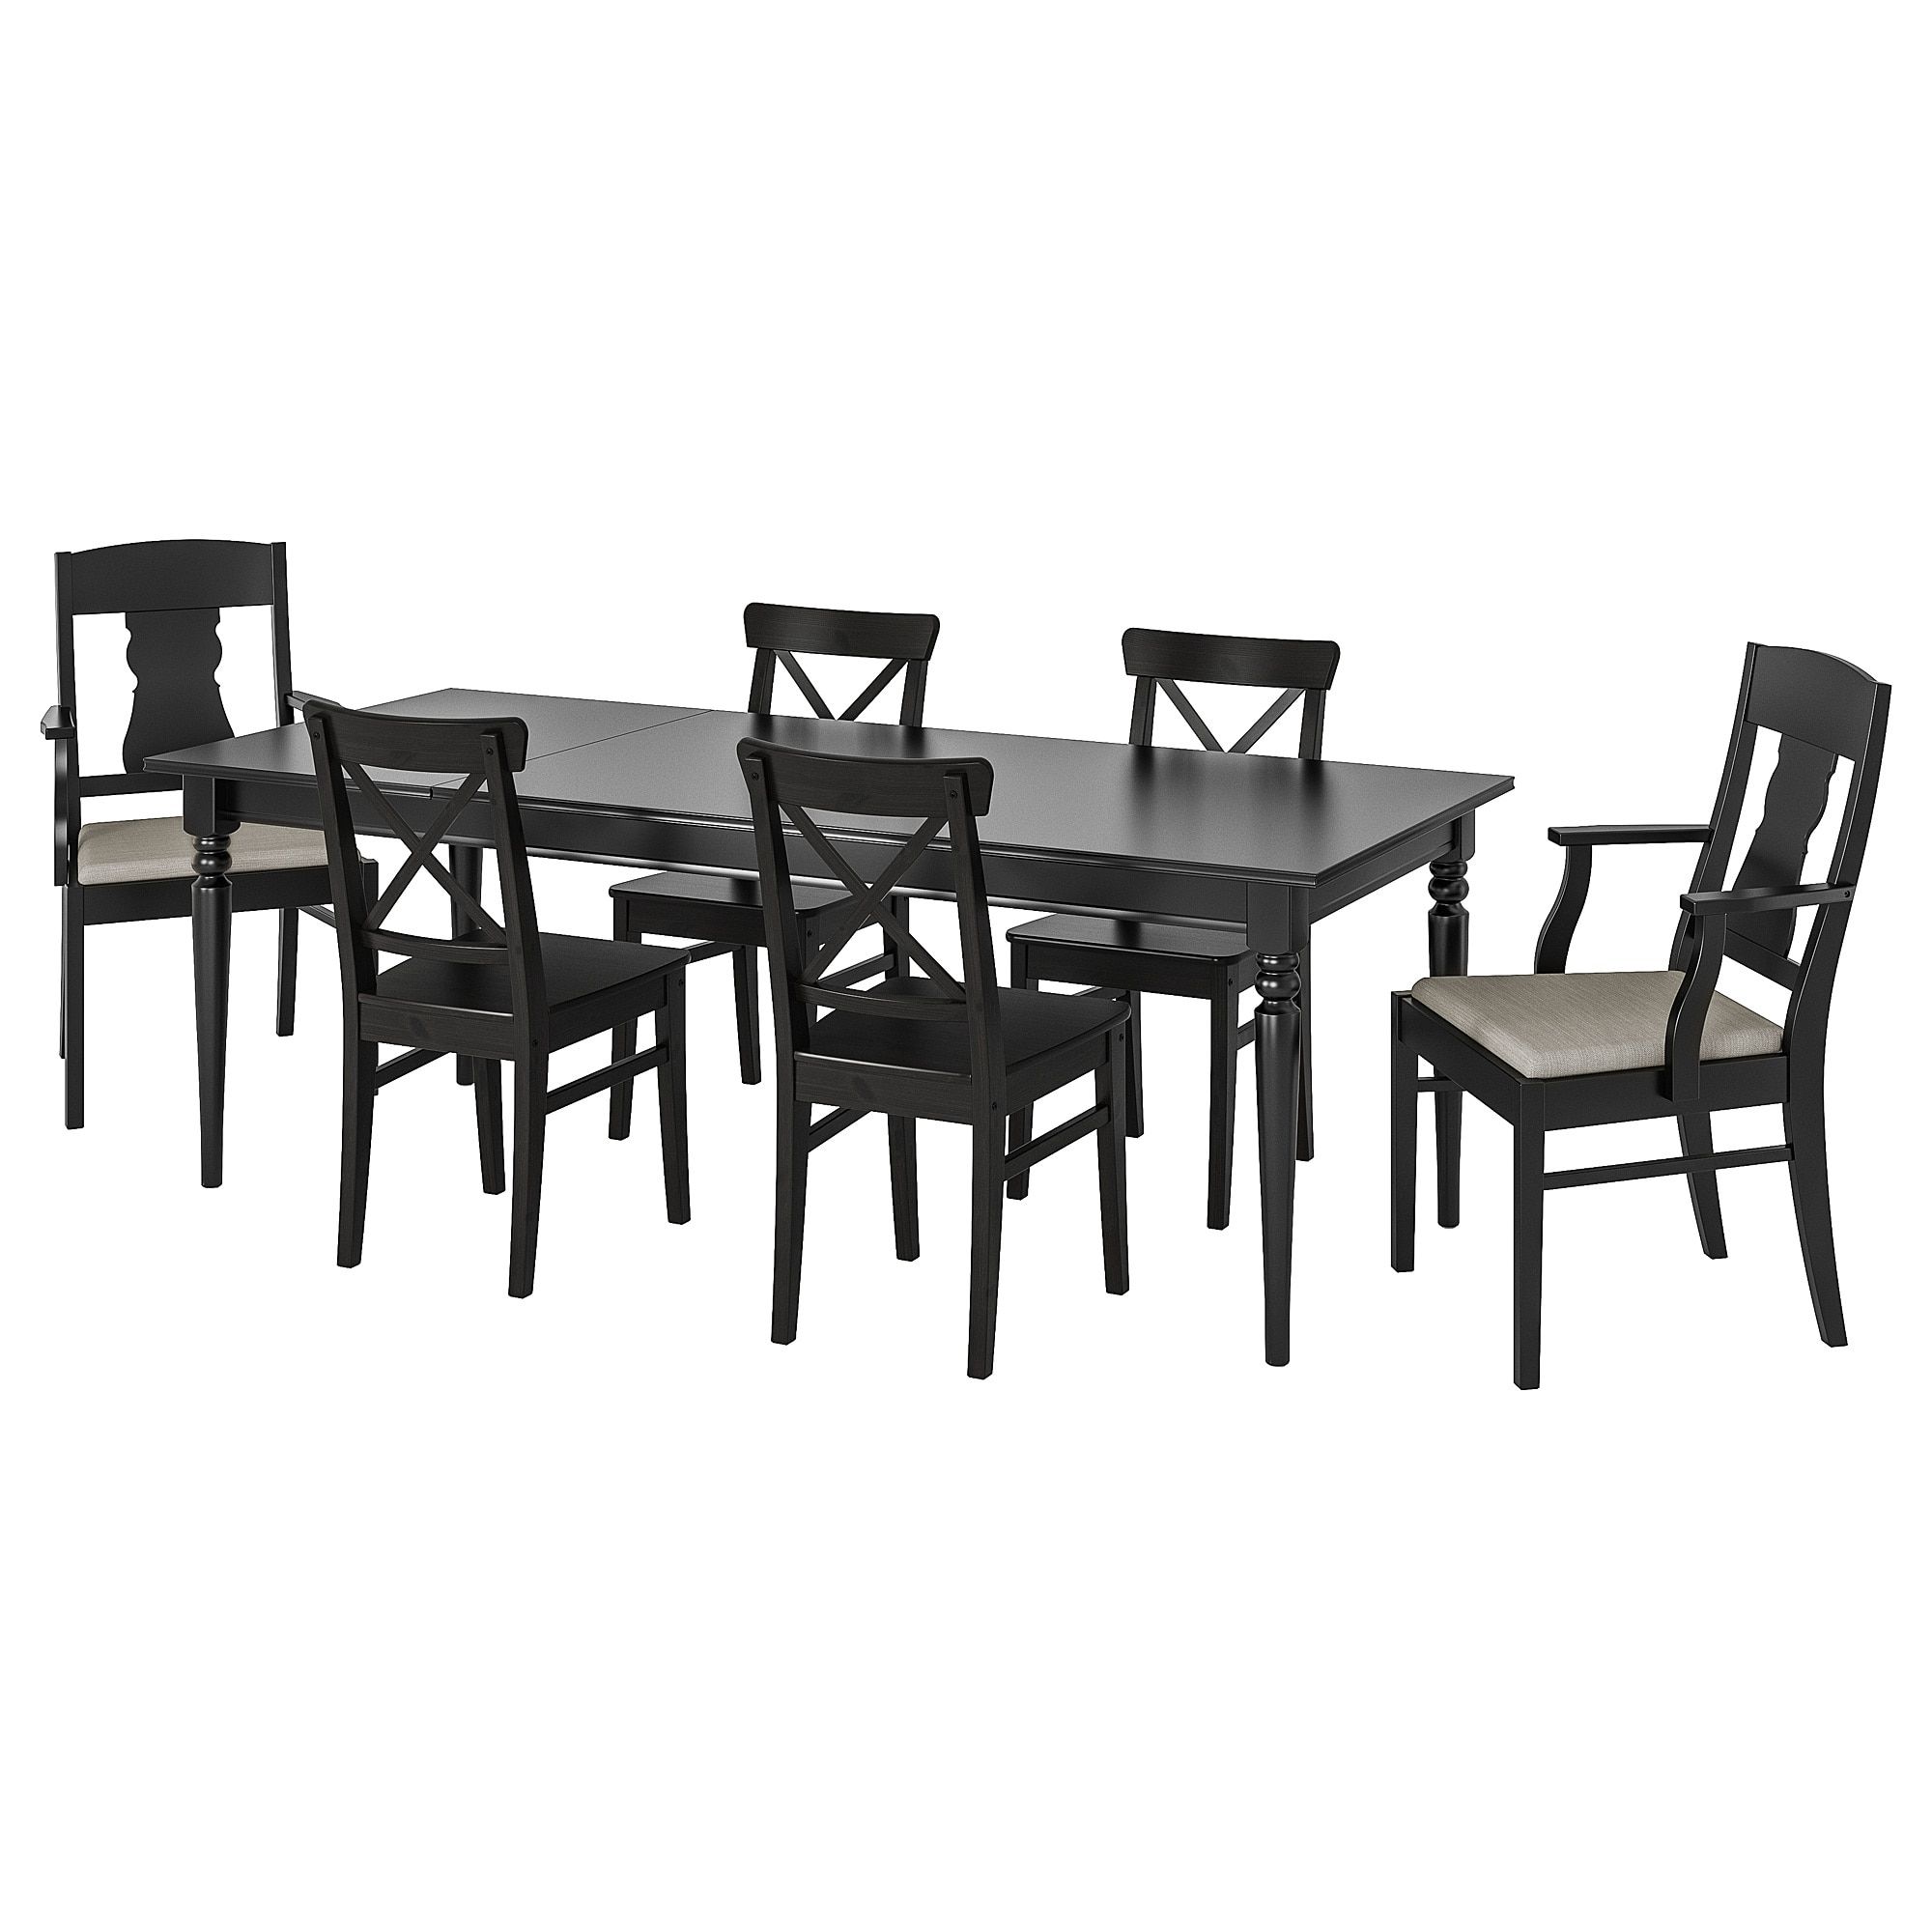 Preferred Castellanos Modern 5 Piece Counter Height Dining Sets Pertaining To Ingatorp / Ingolf Table And 6 Chairs – Black, Nolhaga Grey/beige – Ikea (Photo 16 of 20)